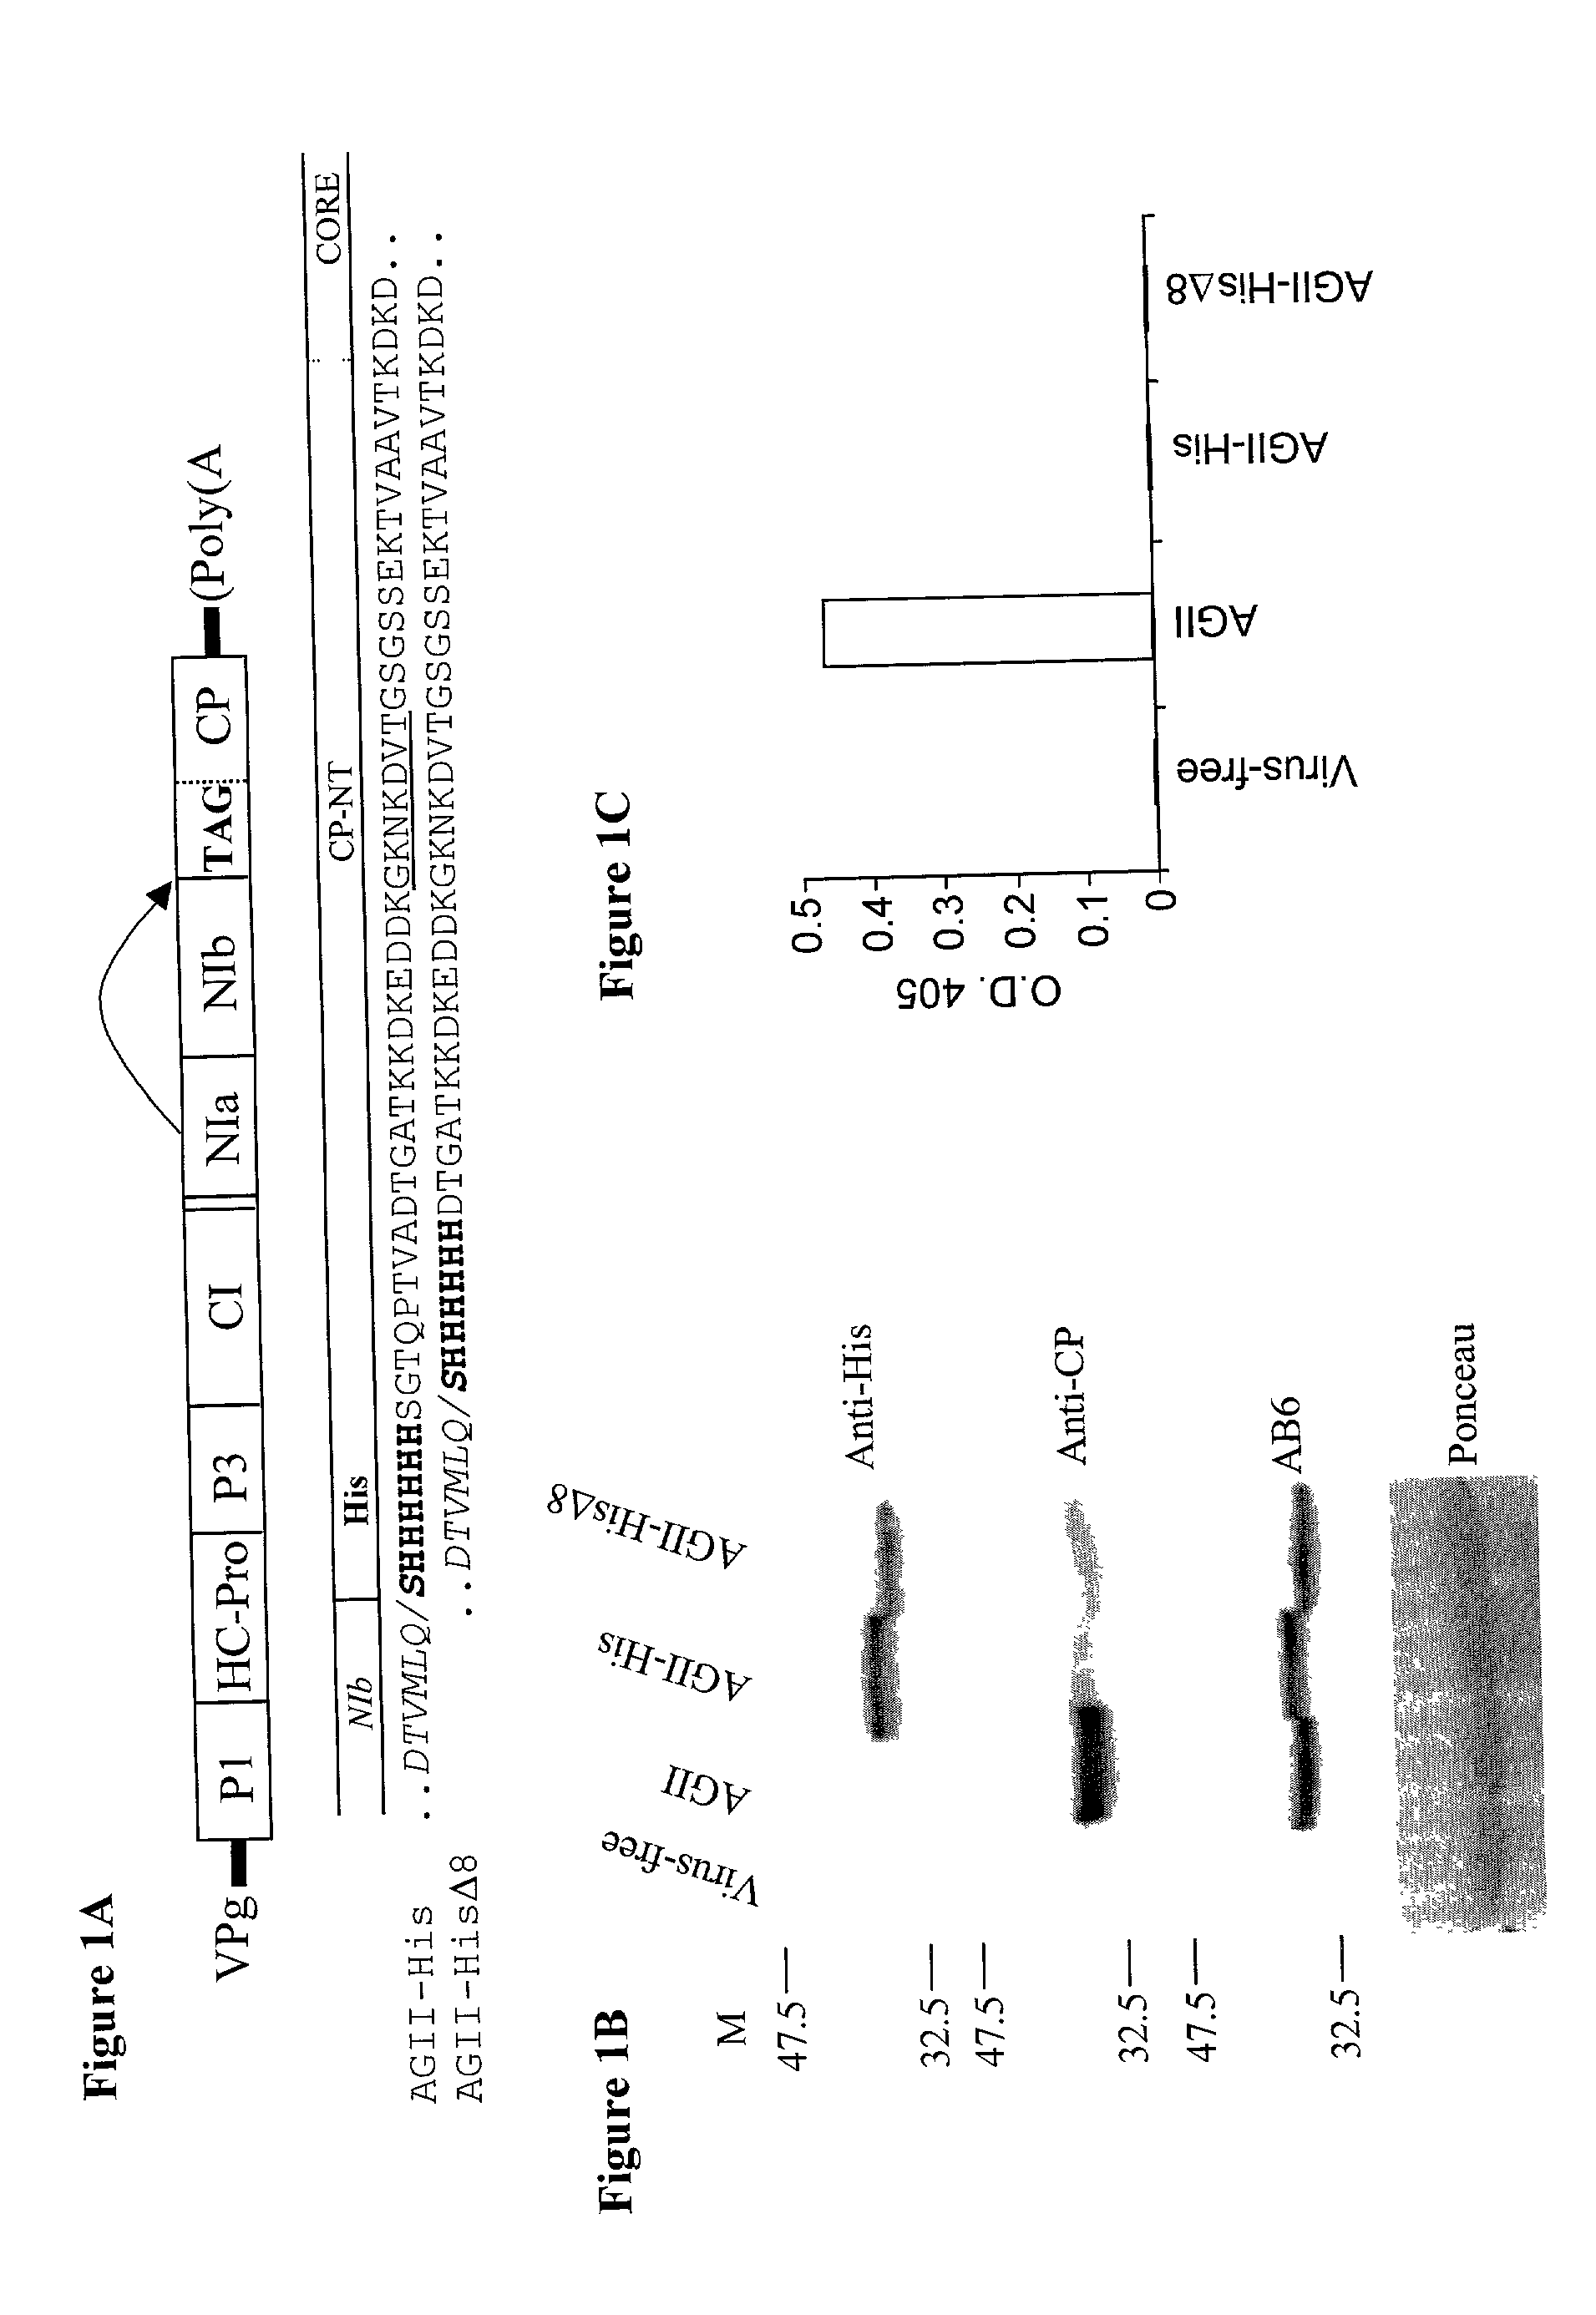 Vectors for expressing heterologous peptides at the amino-terminus of potyvirus coat protein, methods for use thereof, plants infected with same and methods of vaccination using same